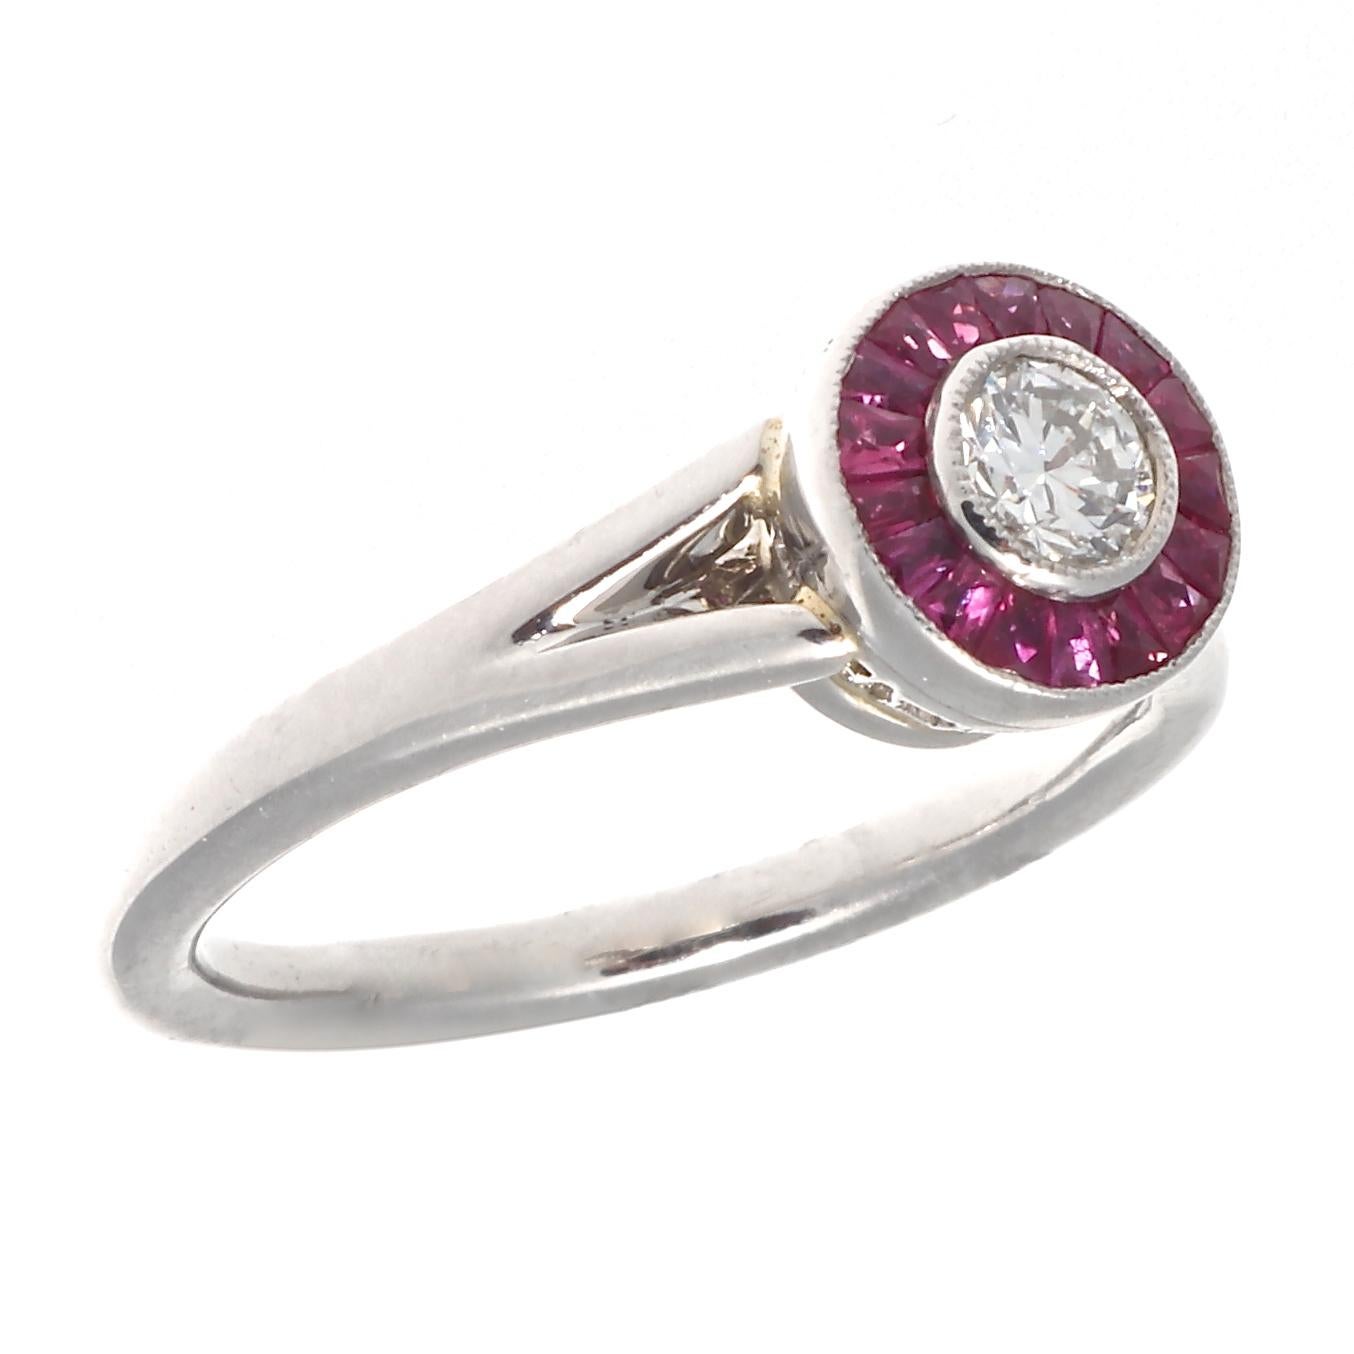 The halo diamond ring with bright red rubies. Featuring a lovely round brilliant cut diamond that has been surrounded by lively natural red rubies. Crafted in platinum. Ring size 5 and can easily be resized if needed, this would come complimentary